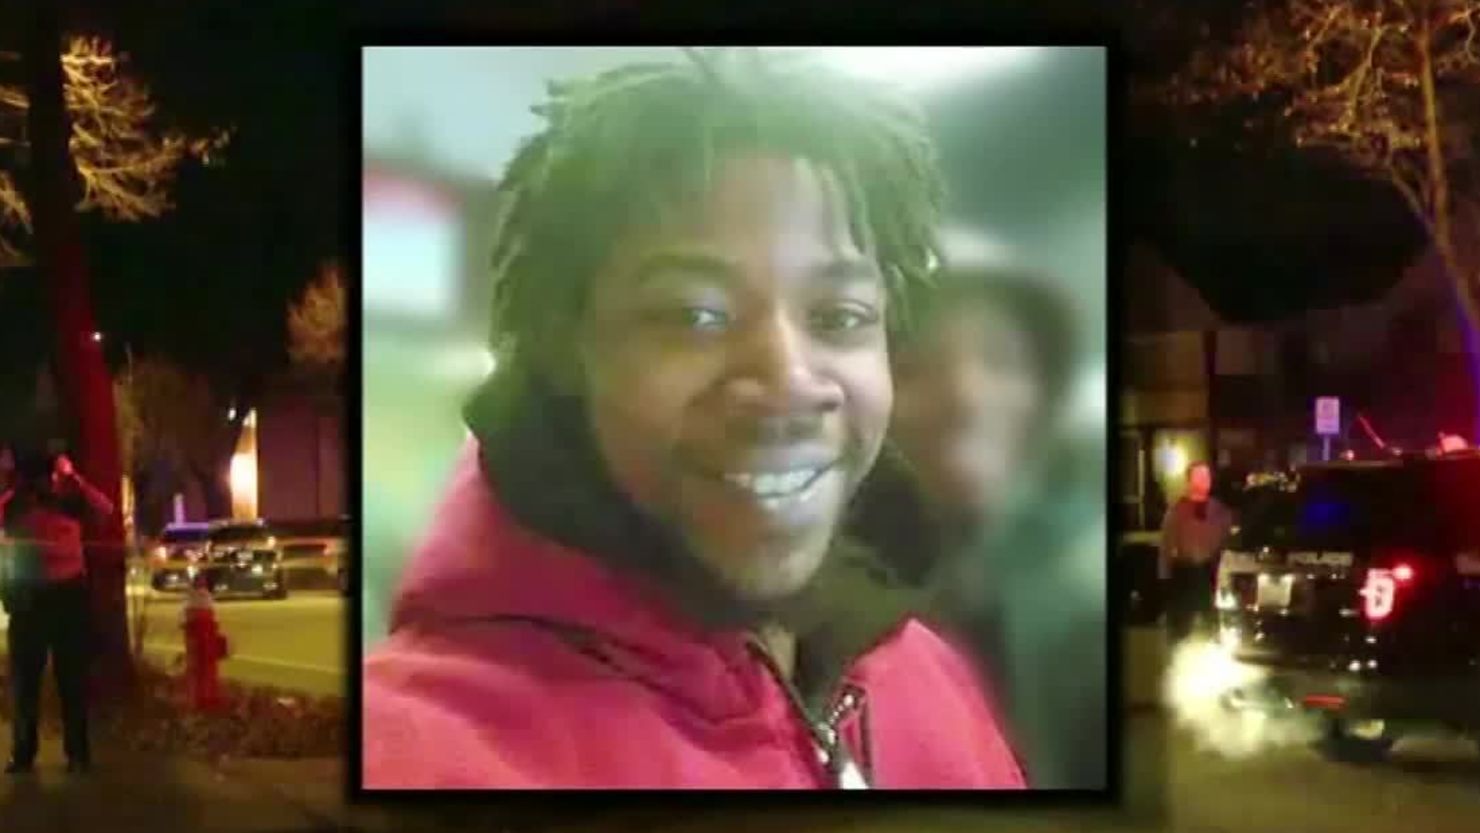 Jamar Clark, 24, was shot and killed by Minneapolis police during a scuffle on November 15, 2015.